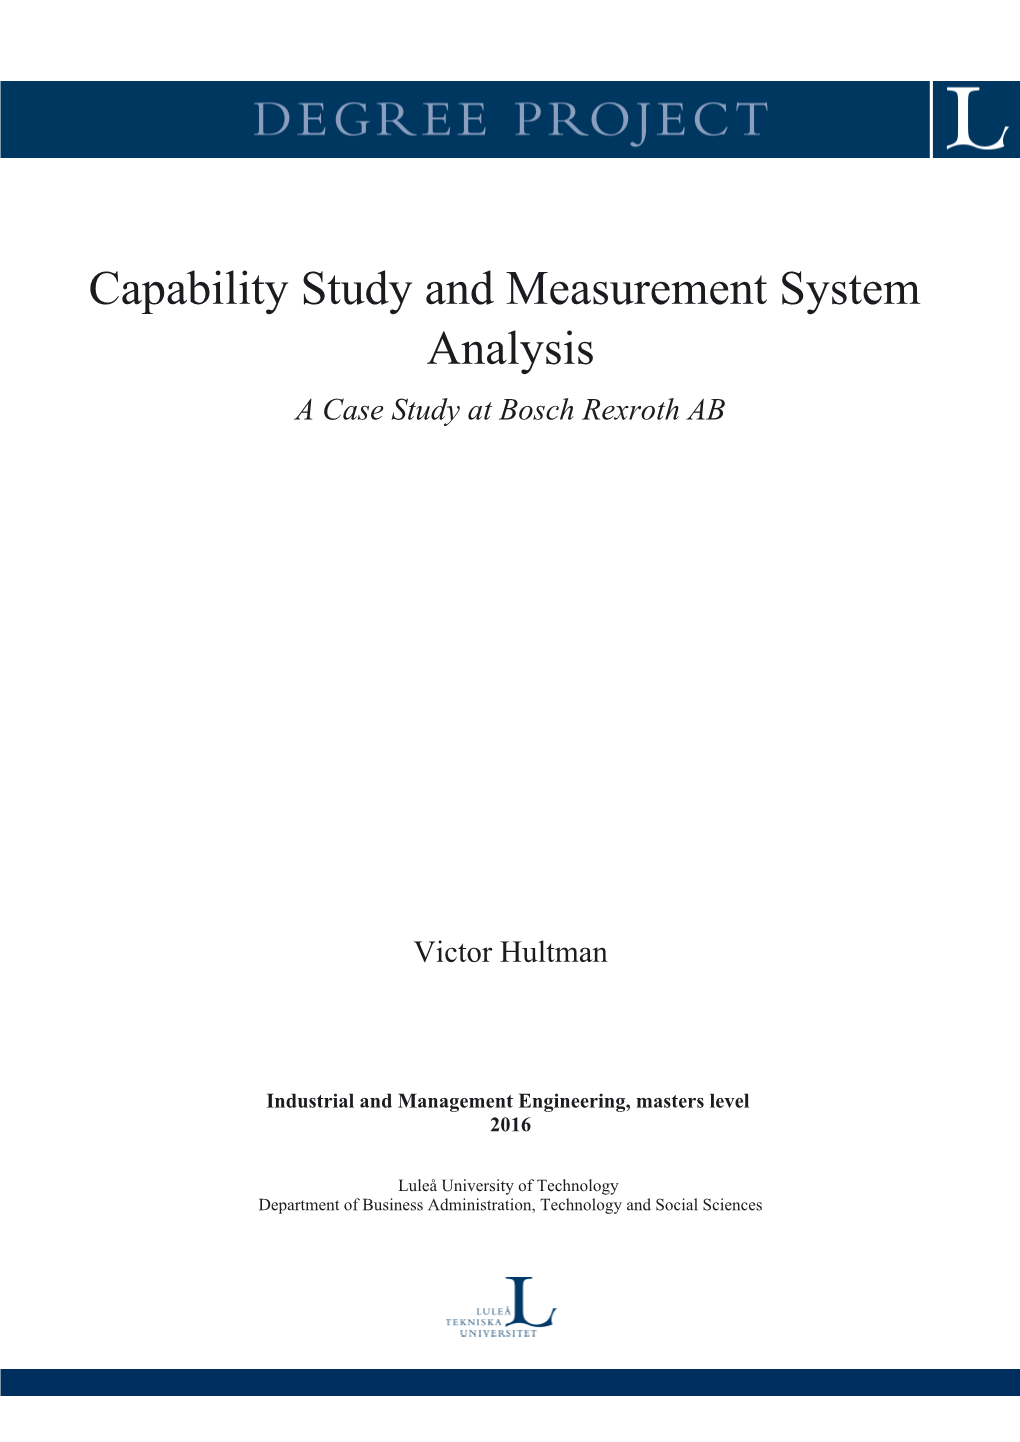 Capability Study and Measurement System Analysis a Case Study at Bosch Rexroth AB